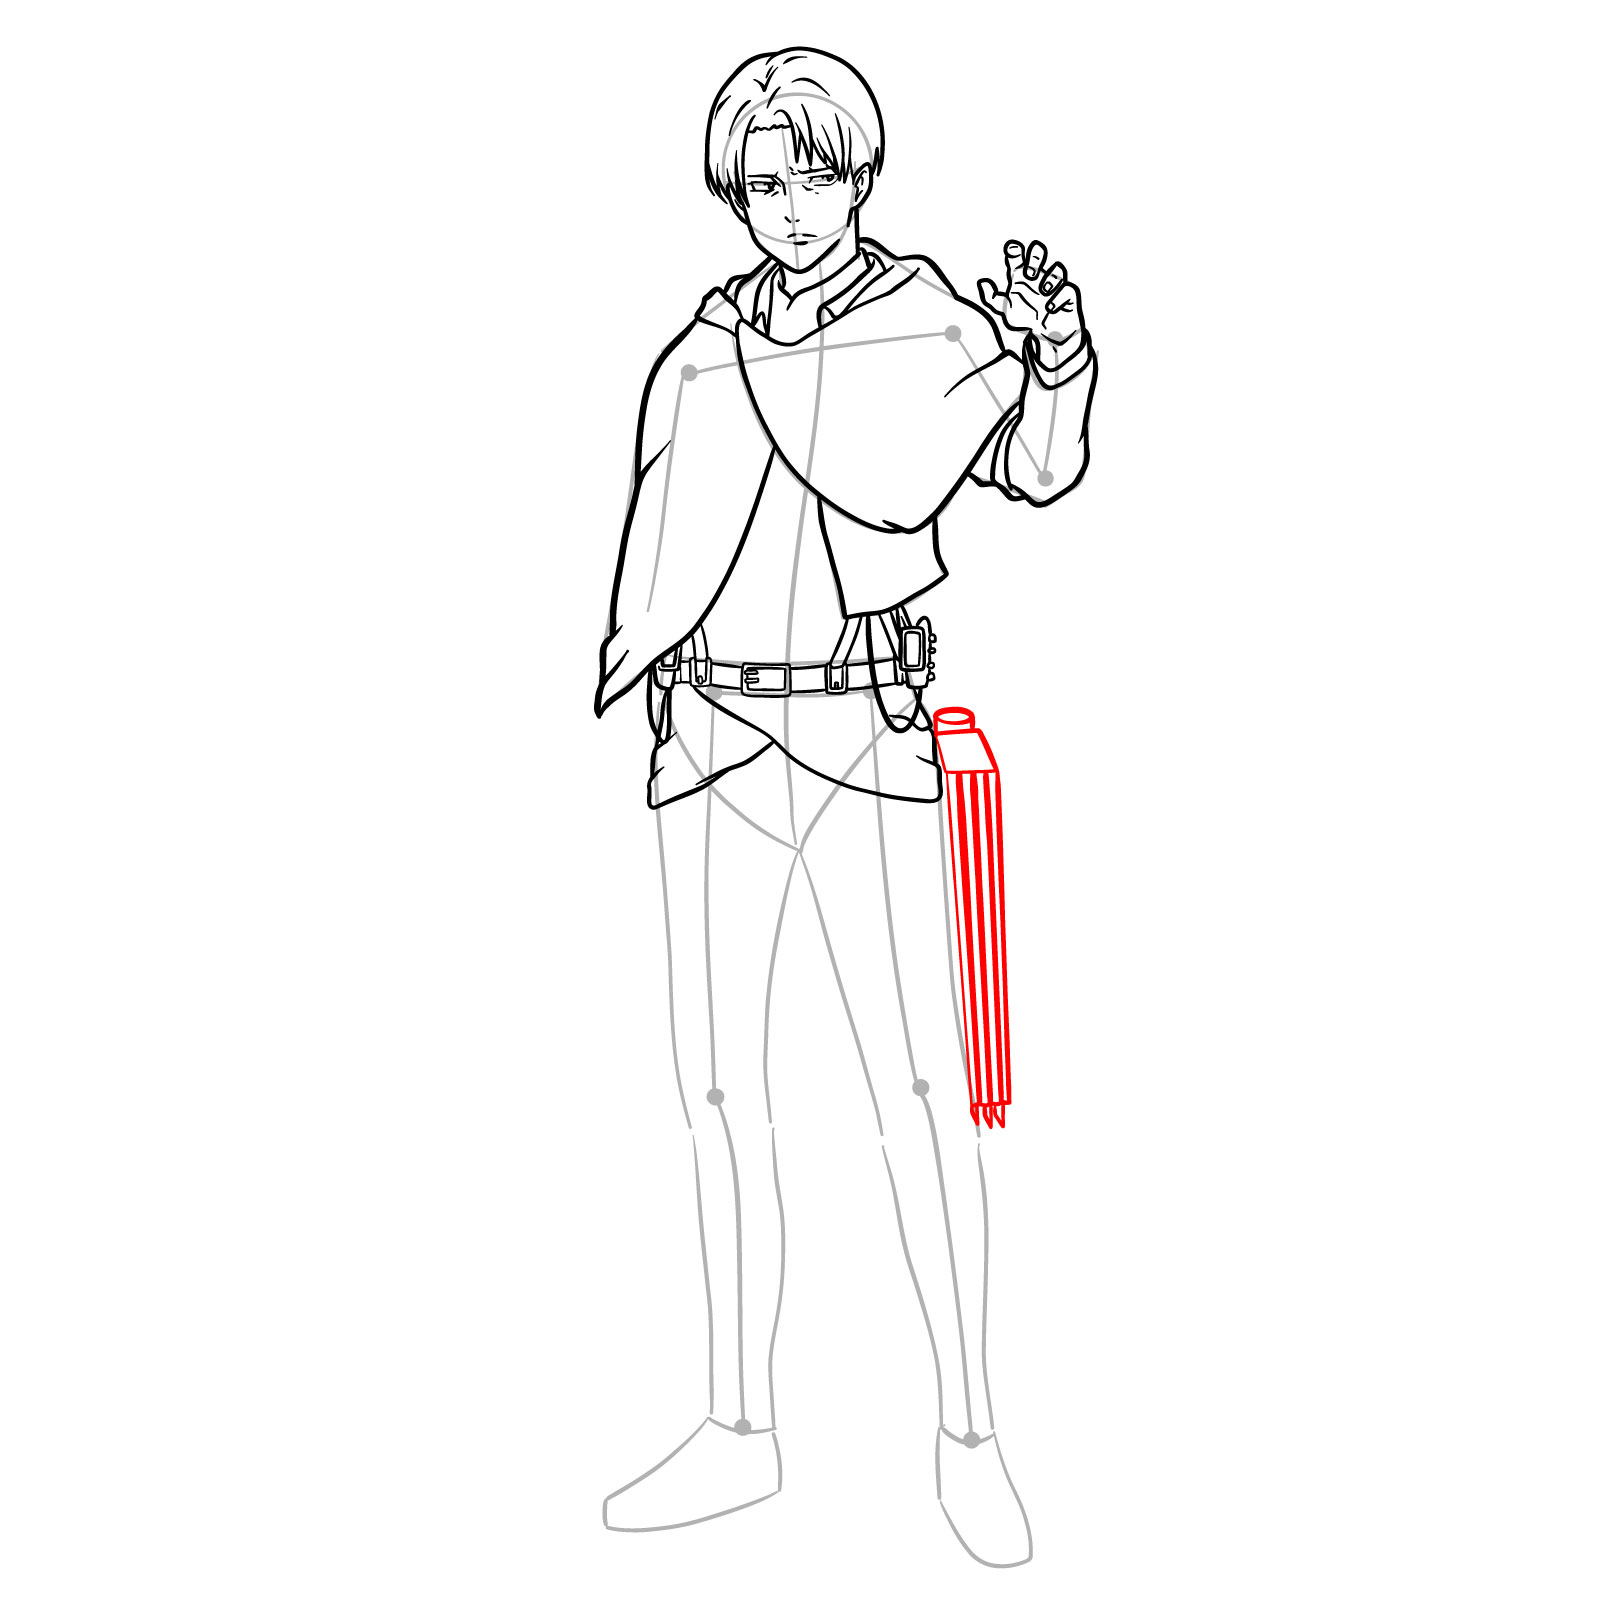 Step-by-step guide on drawing Captain Levi's legs and left ODM gear for a full body portrait - step 19